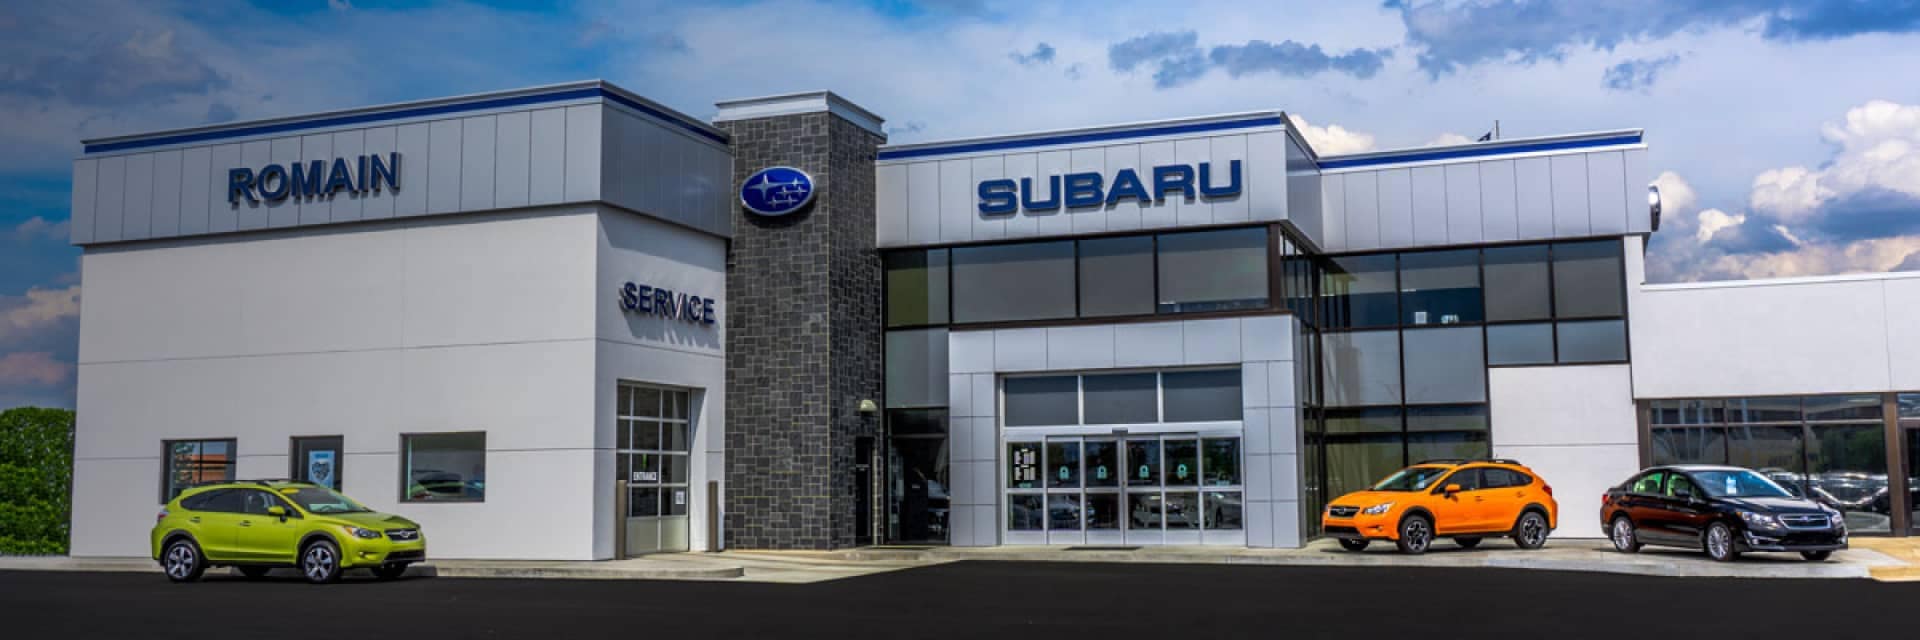 An exterior view of a Subaru dealership in the day